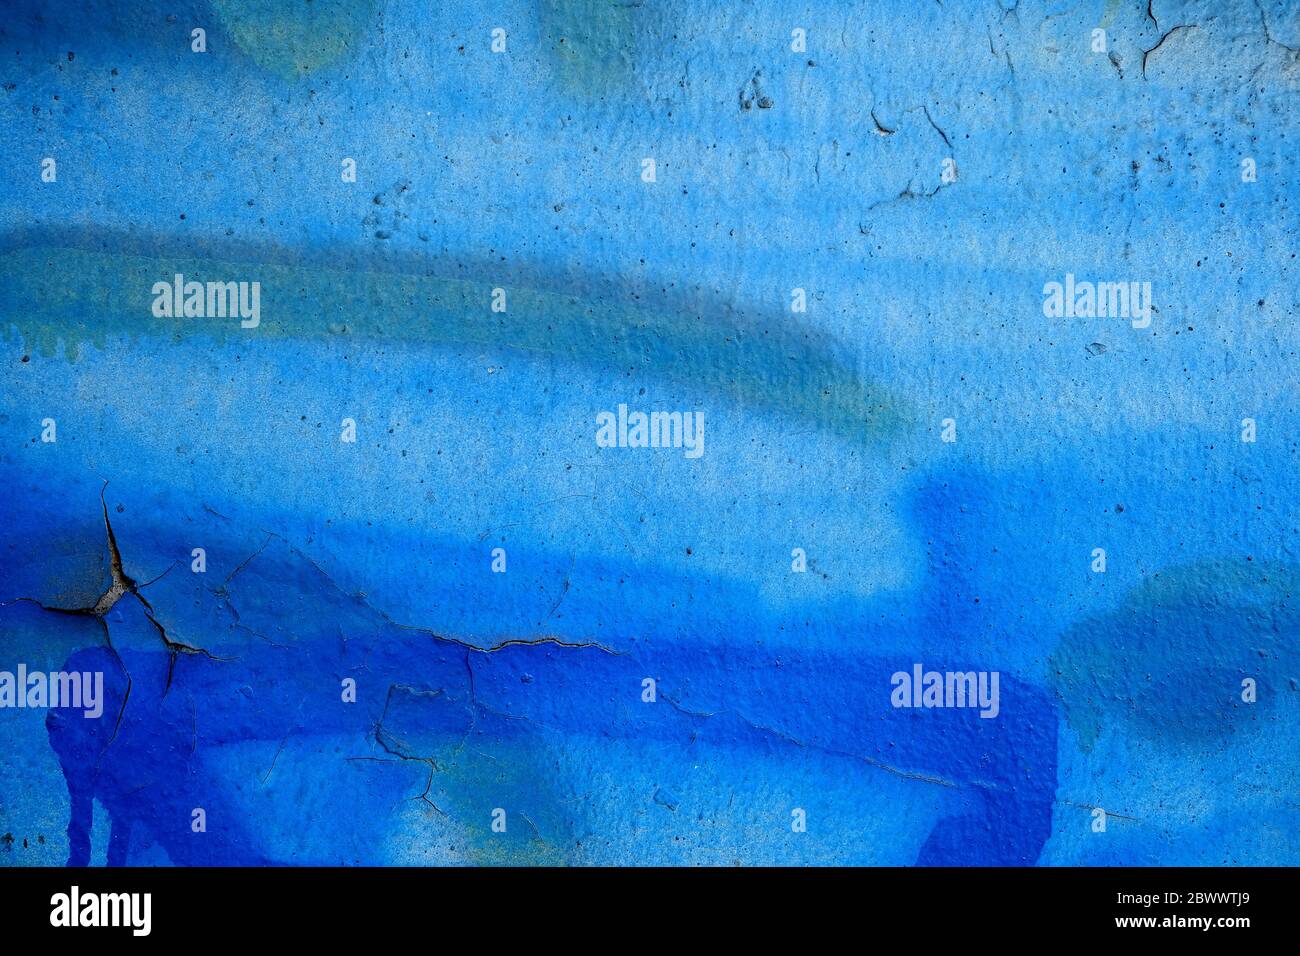 Blue Peeling Paint on Concrete Wall Texture Background. Stock Photo